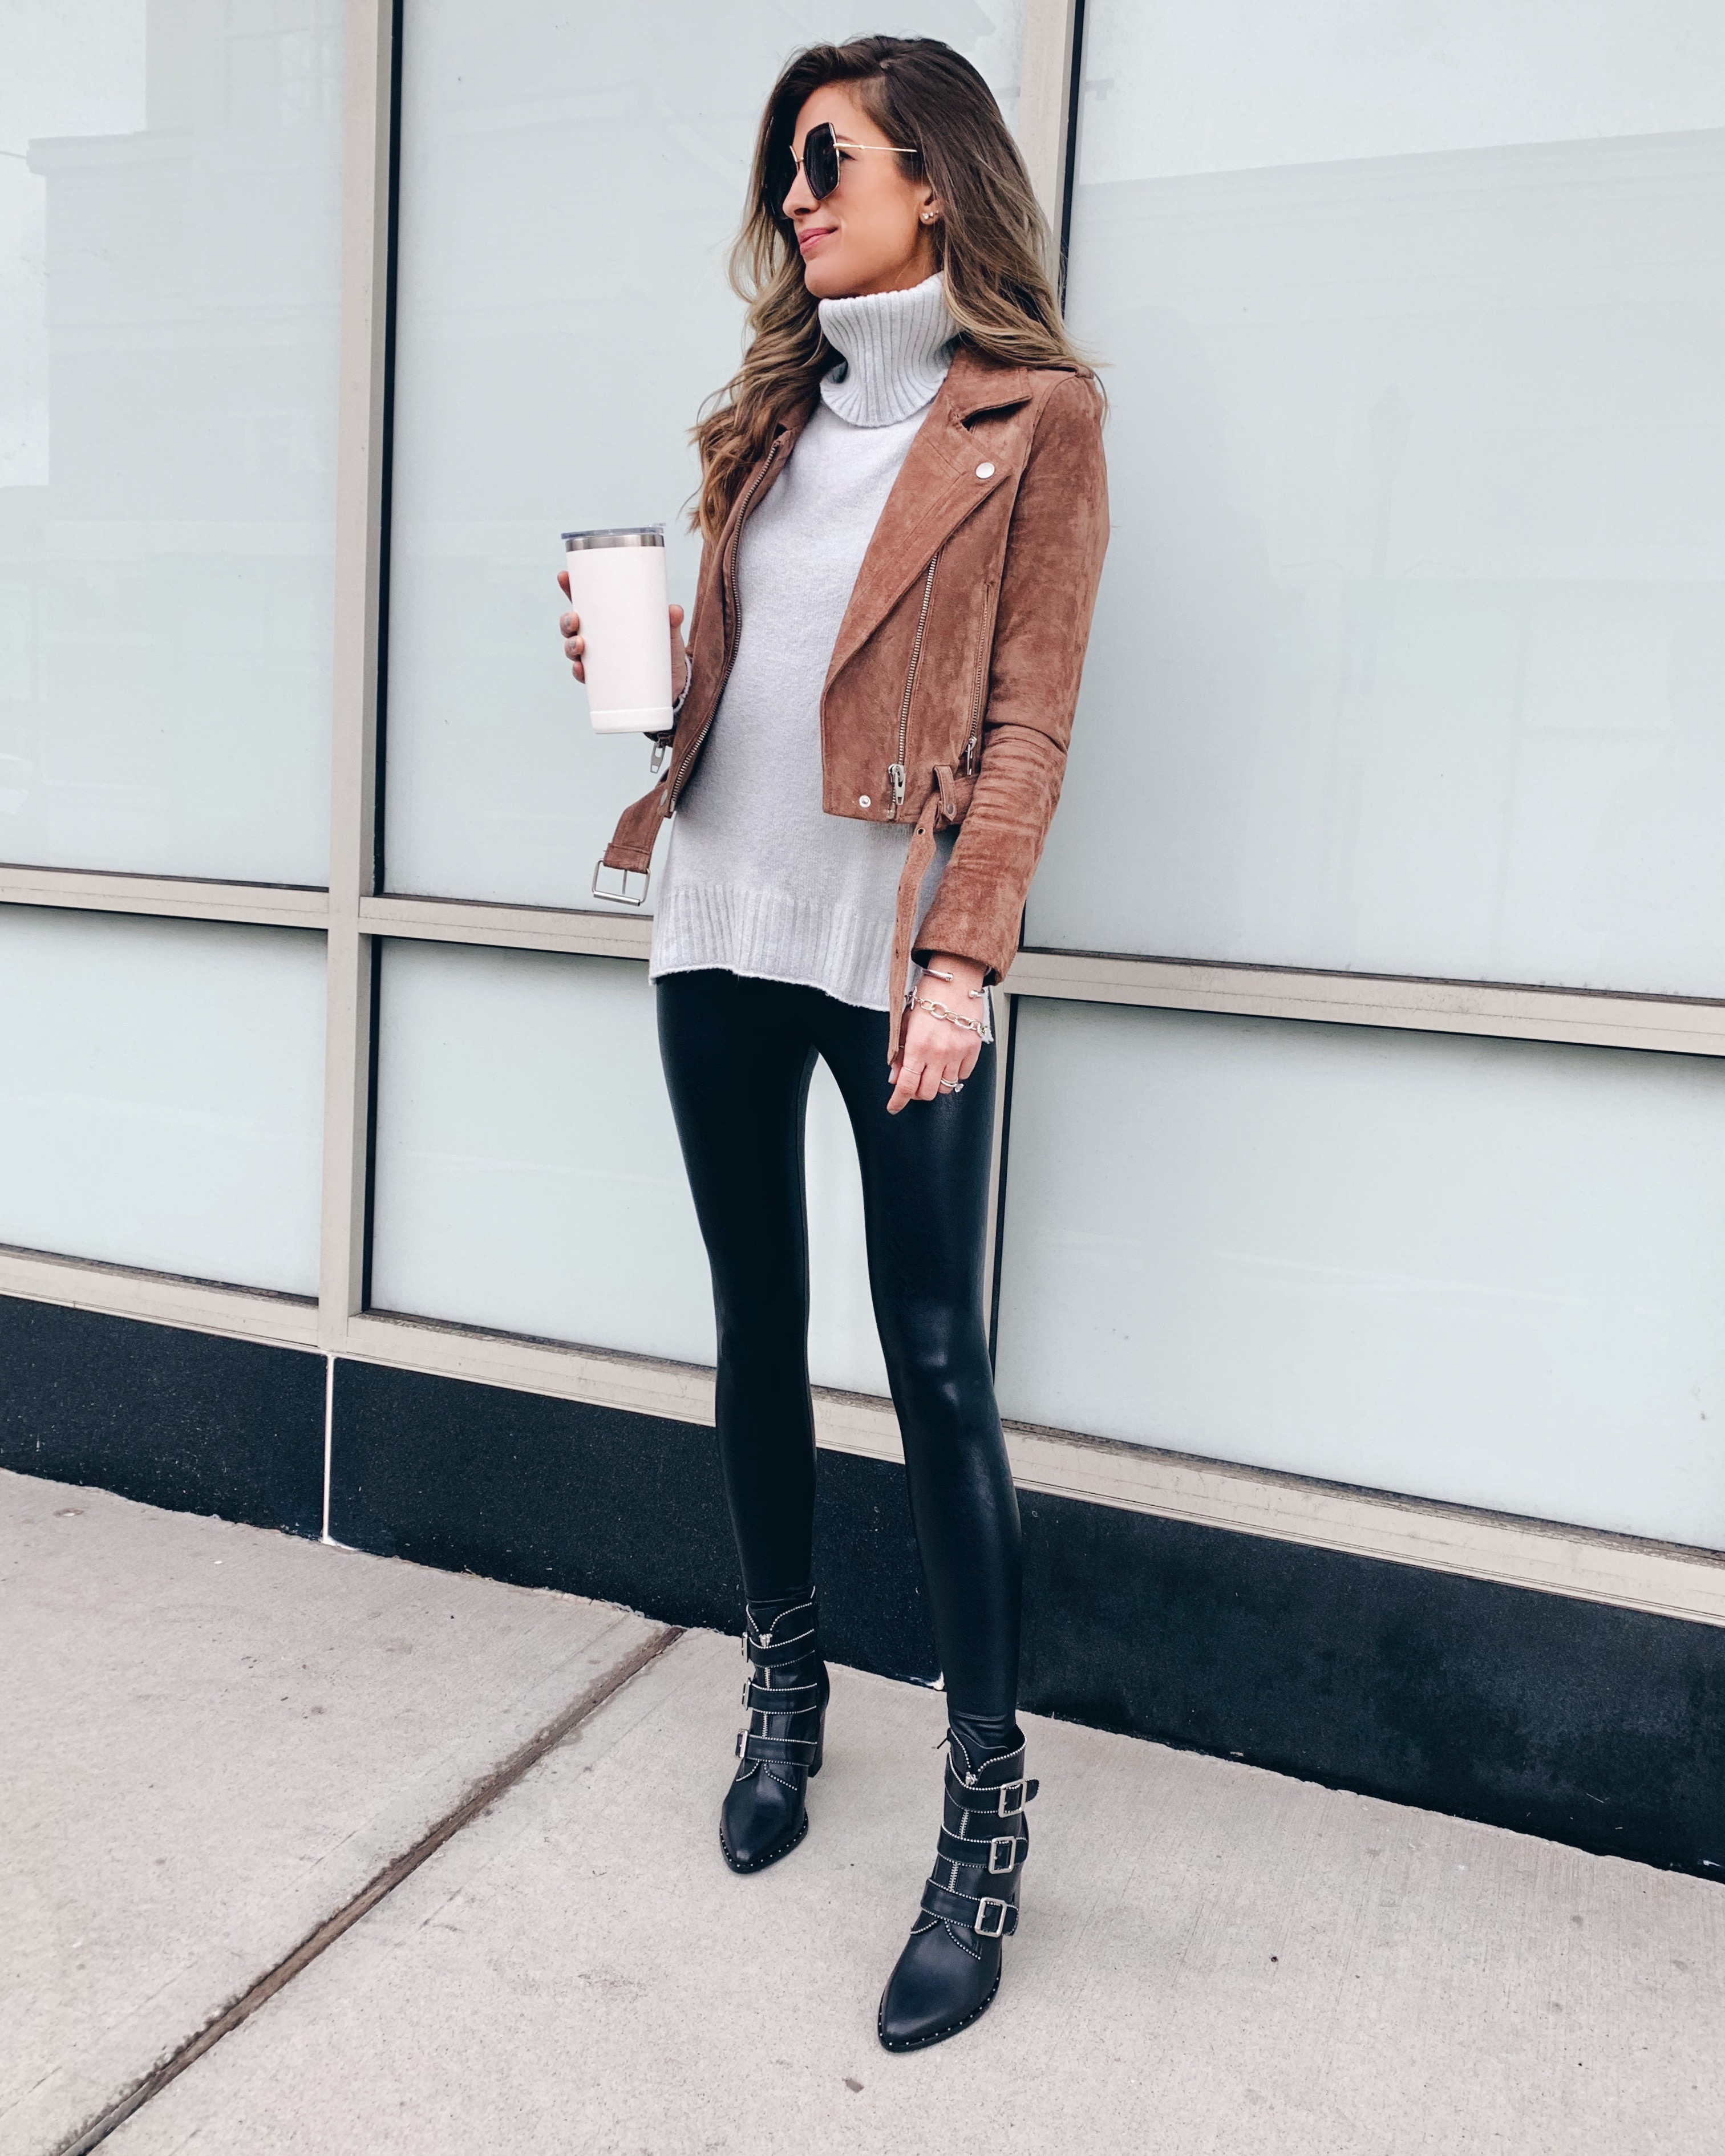 Grey Leggings with Black Leather Jacket Outfits (5 ideas & outfits)